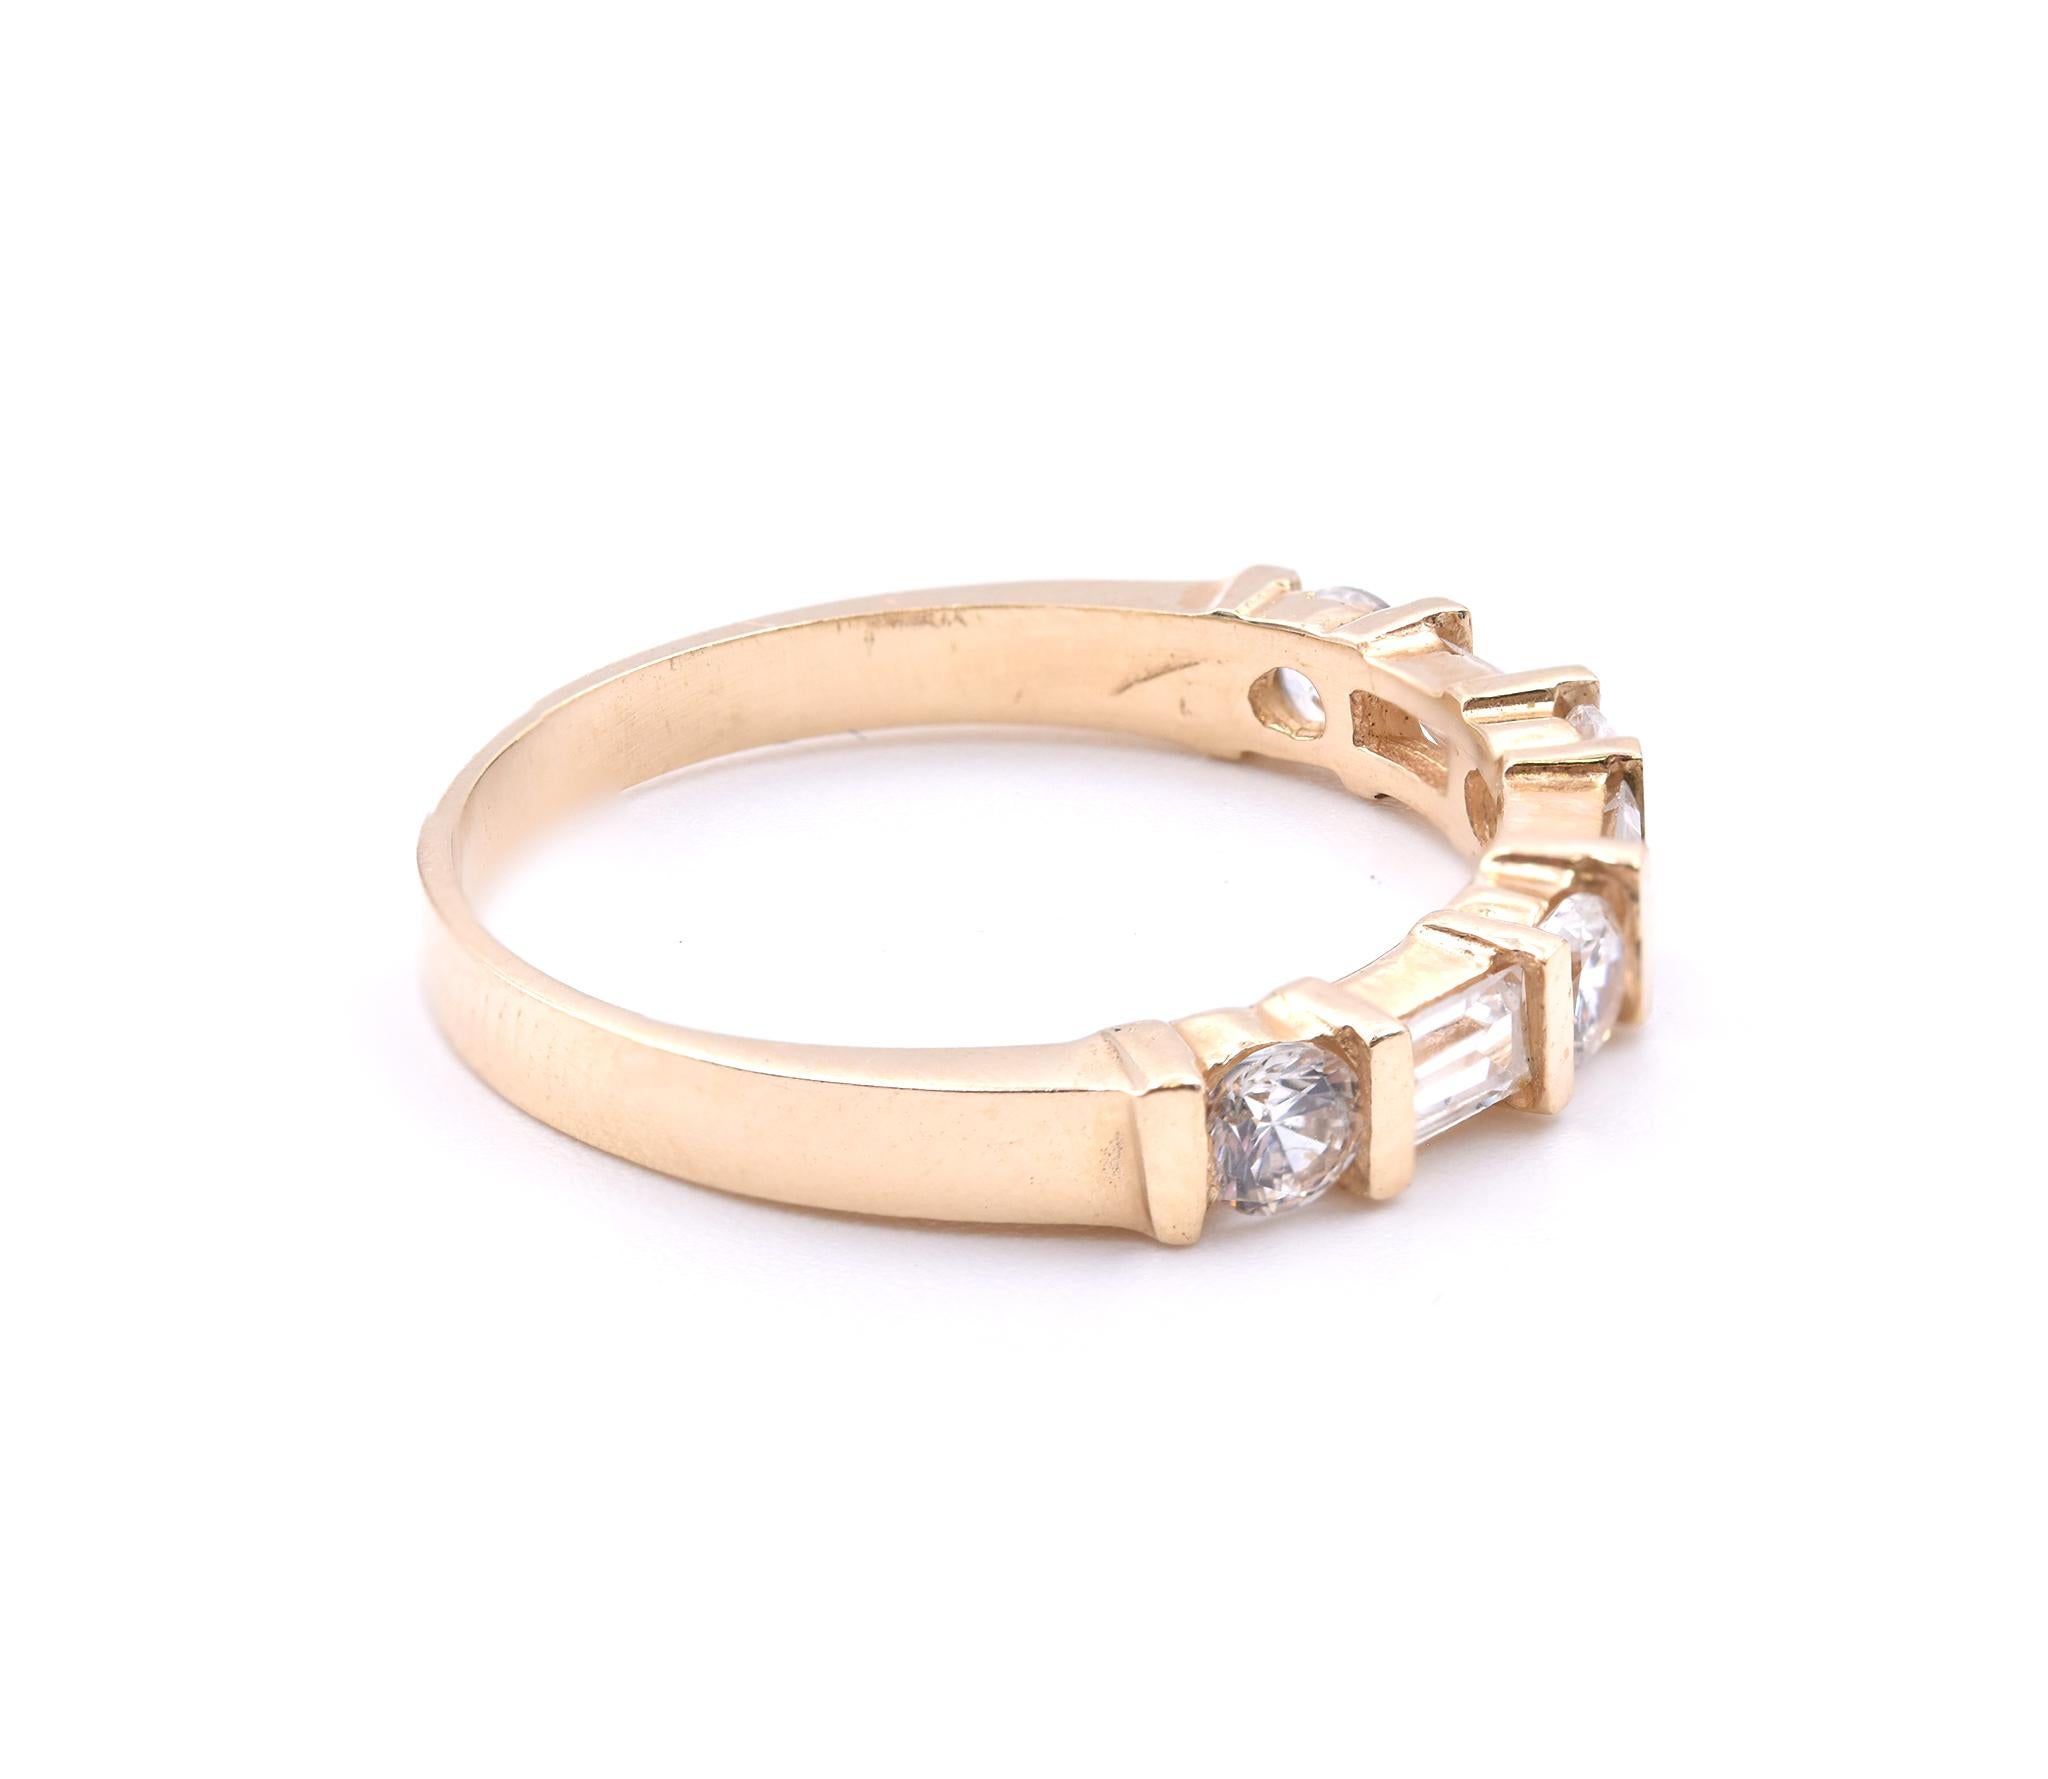 Designer: custom
Material: 14k yellow gold
Diamonds: 4 round cut = .30cttw
Color: G
Clarity: VS
Diamonds: 3 baguette cut = .27ct
Color: G
Clarity: VS
Size: 5.75 (please allow two additional shipping days for sizing requests)  
Dimensions: ring